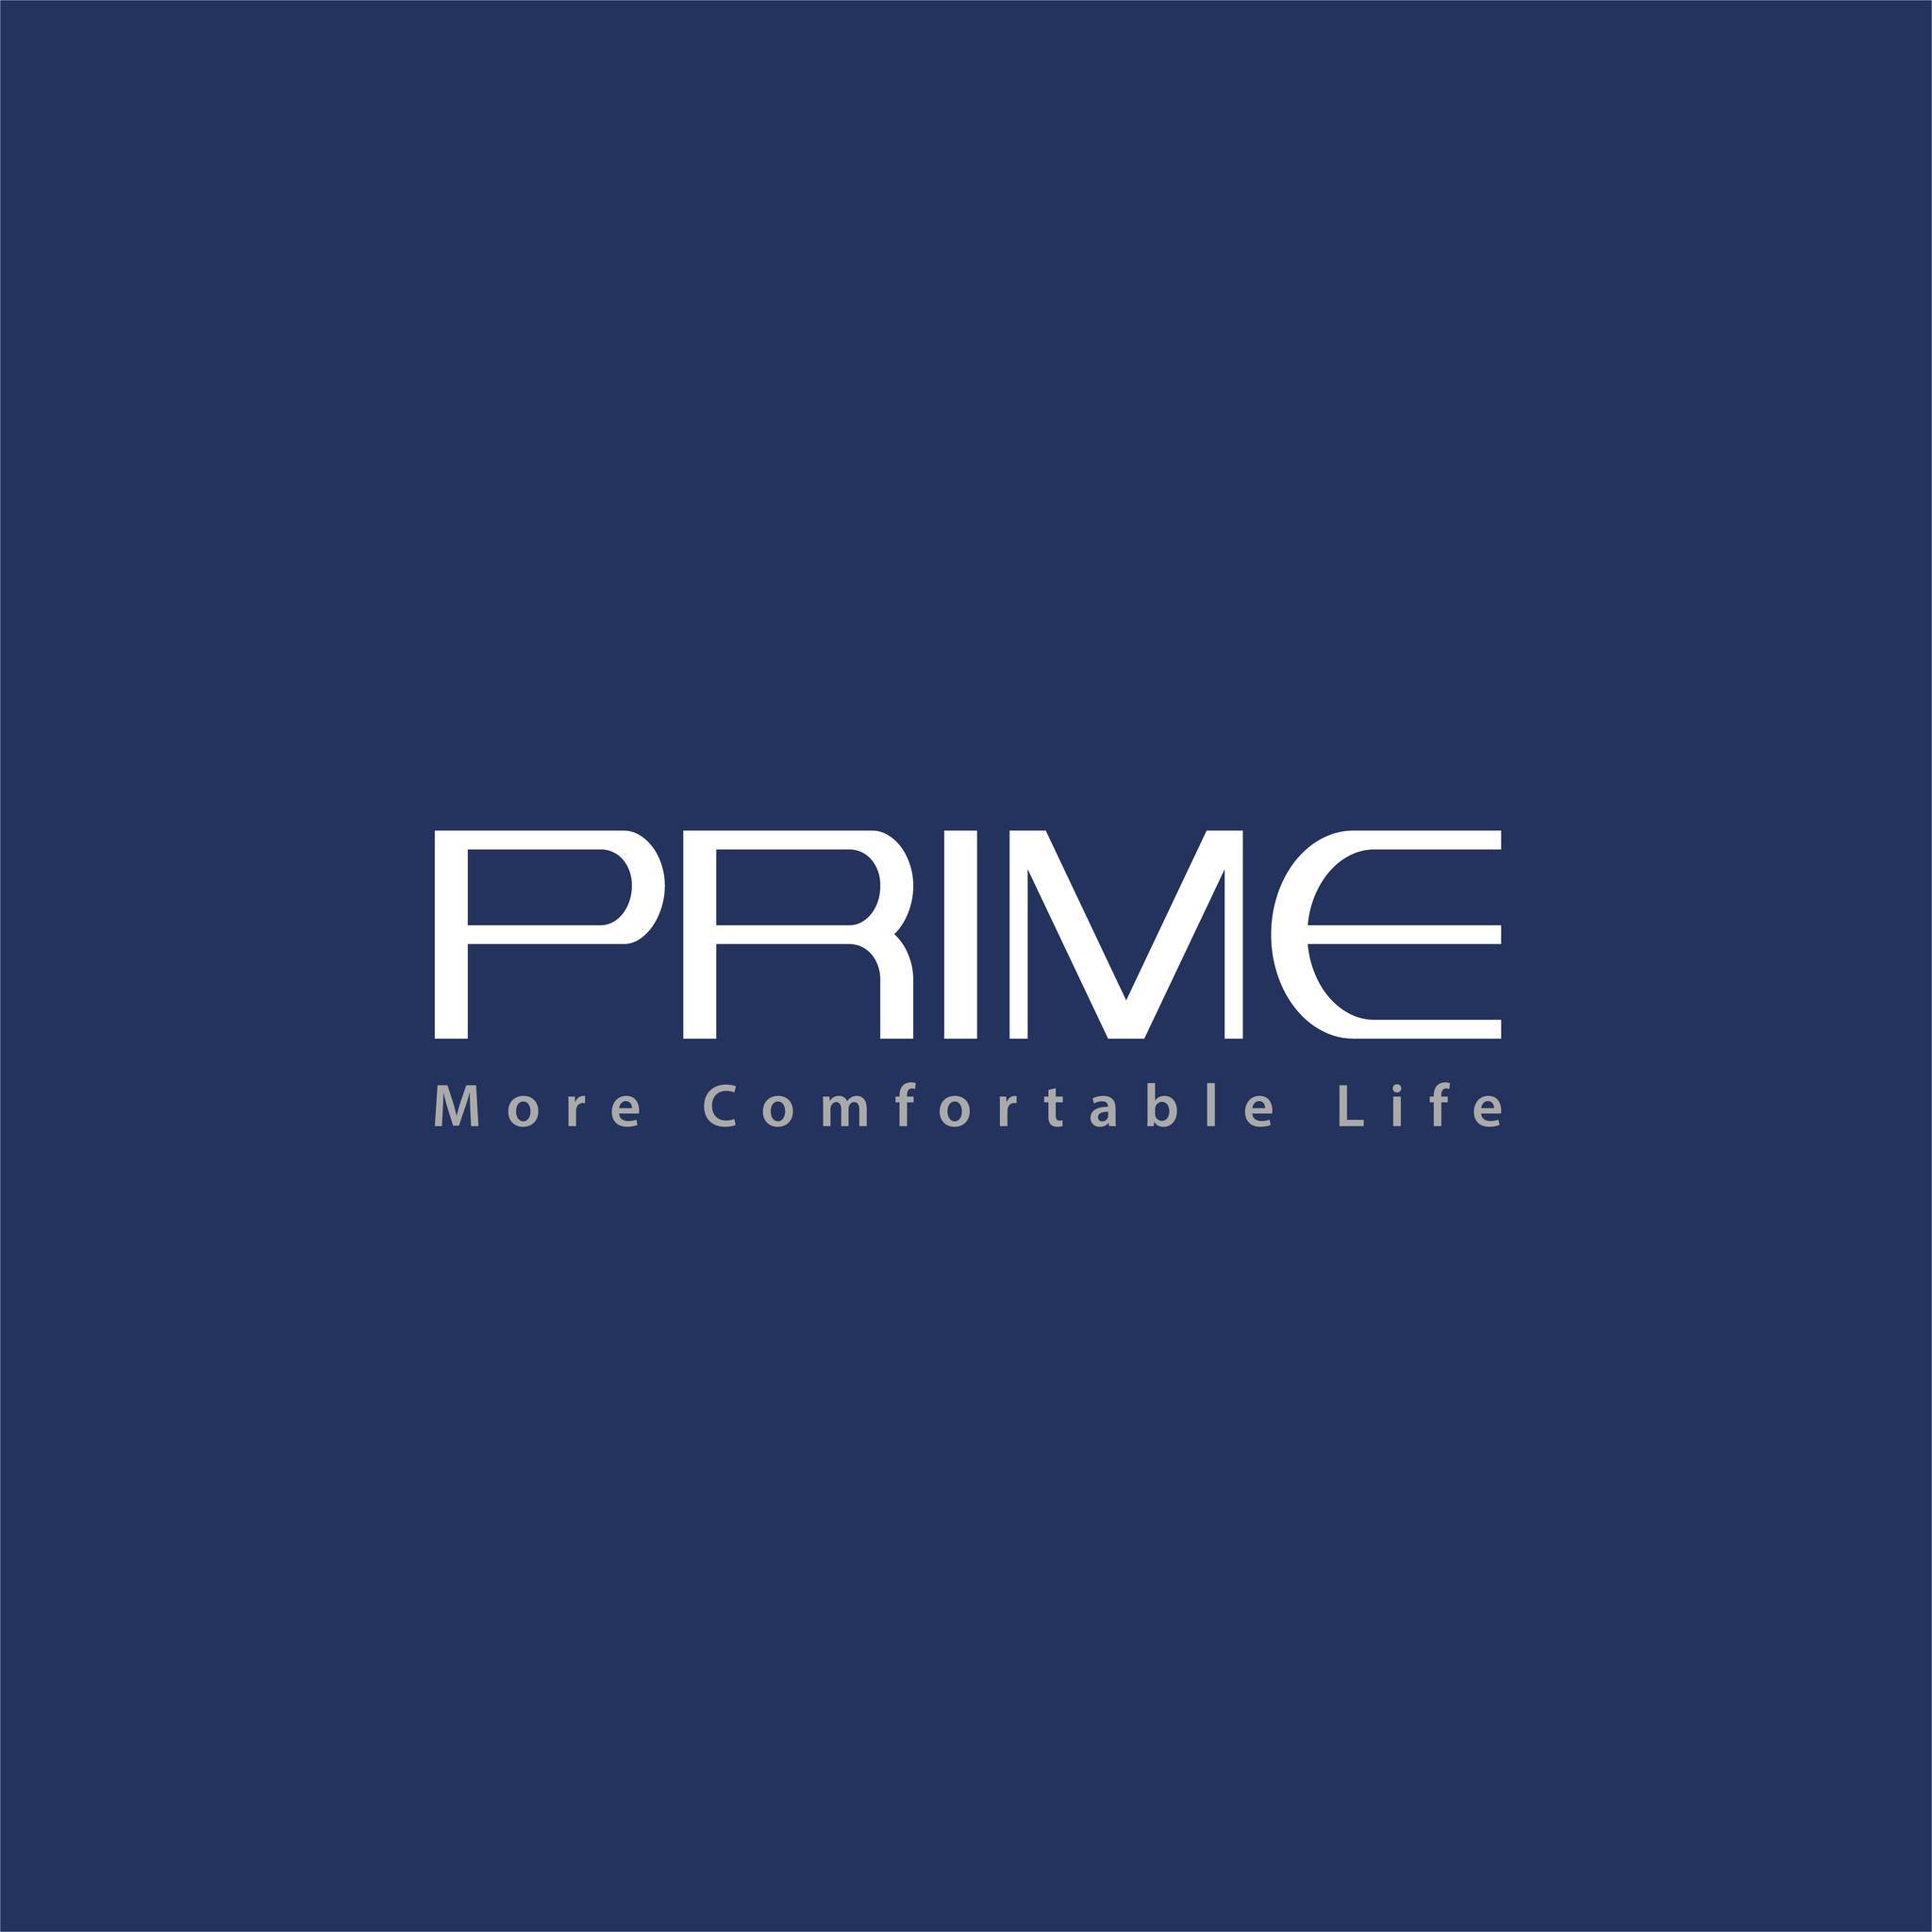 Prime Group